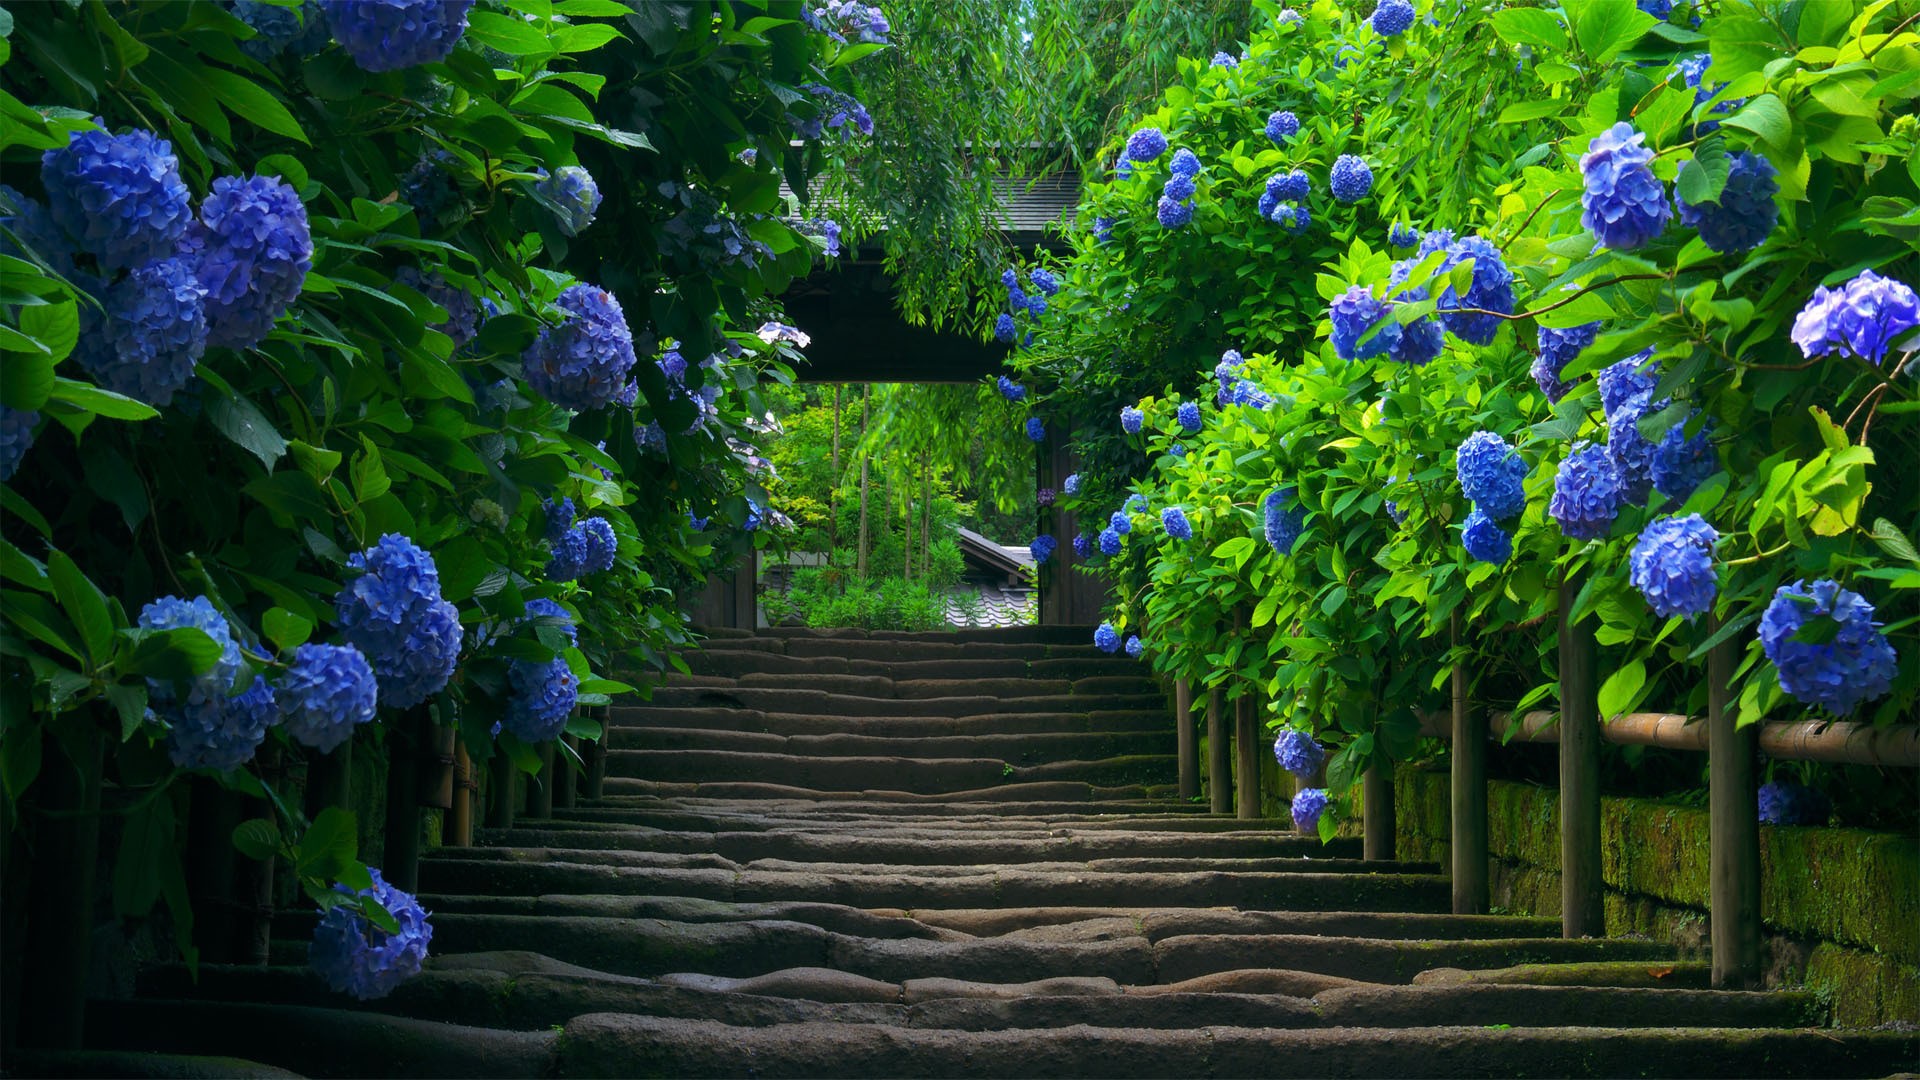 Stairway to a Garden of Nature - High Definition, High Resolution HD  Wallpapers : High Definition, High Resolution HD Wallpapers